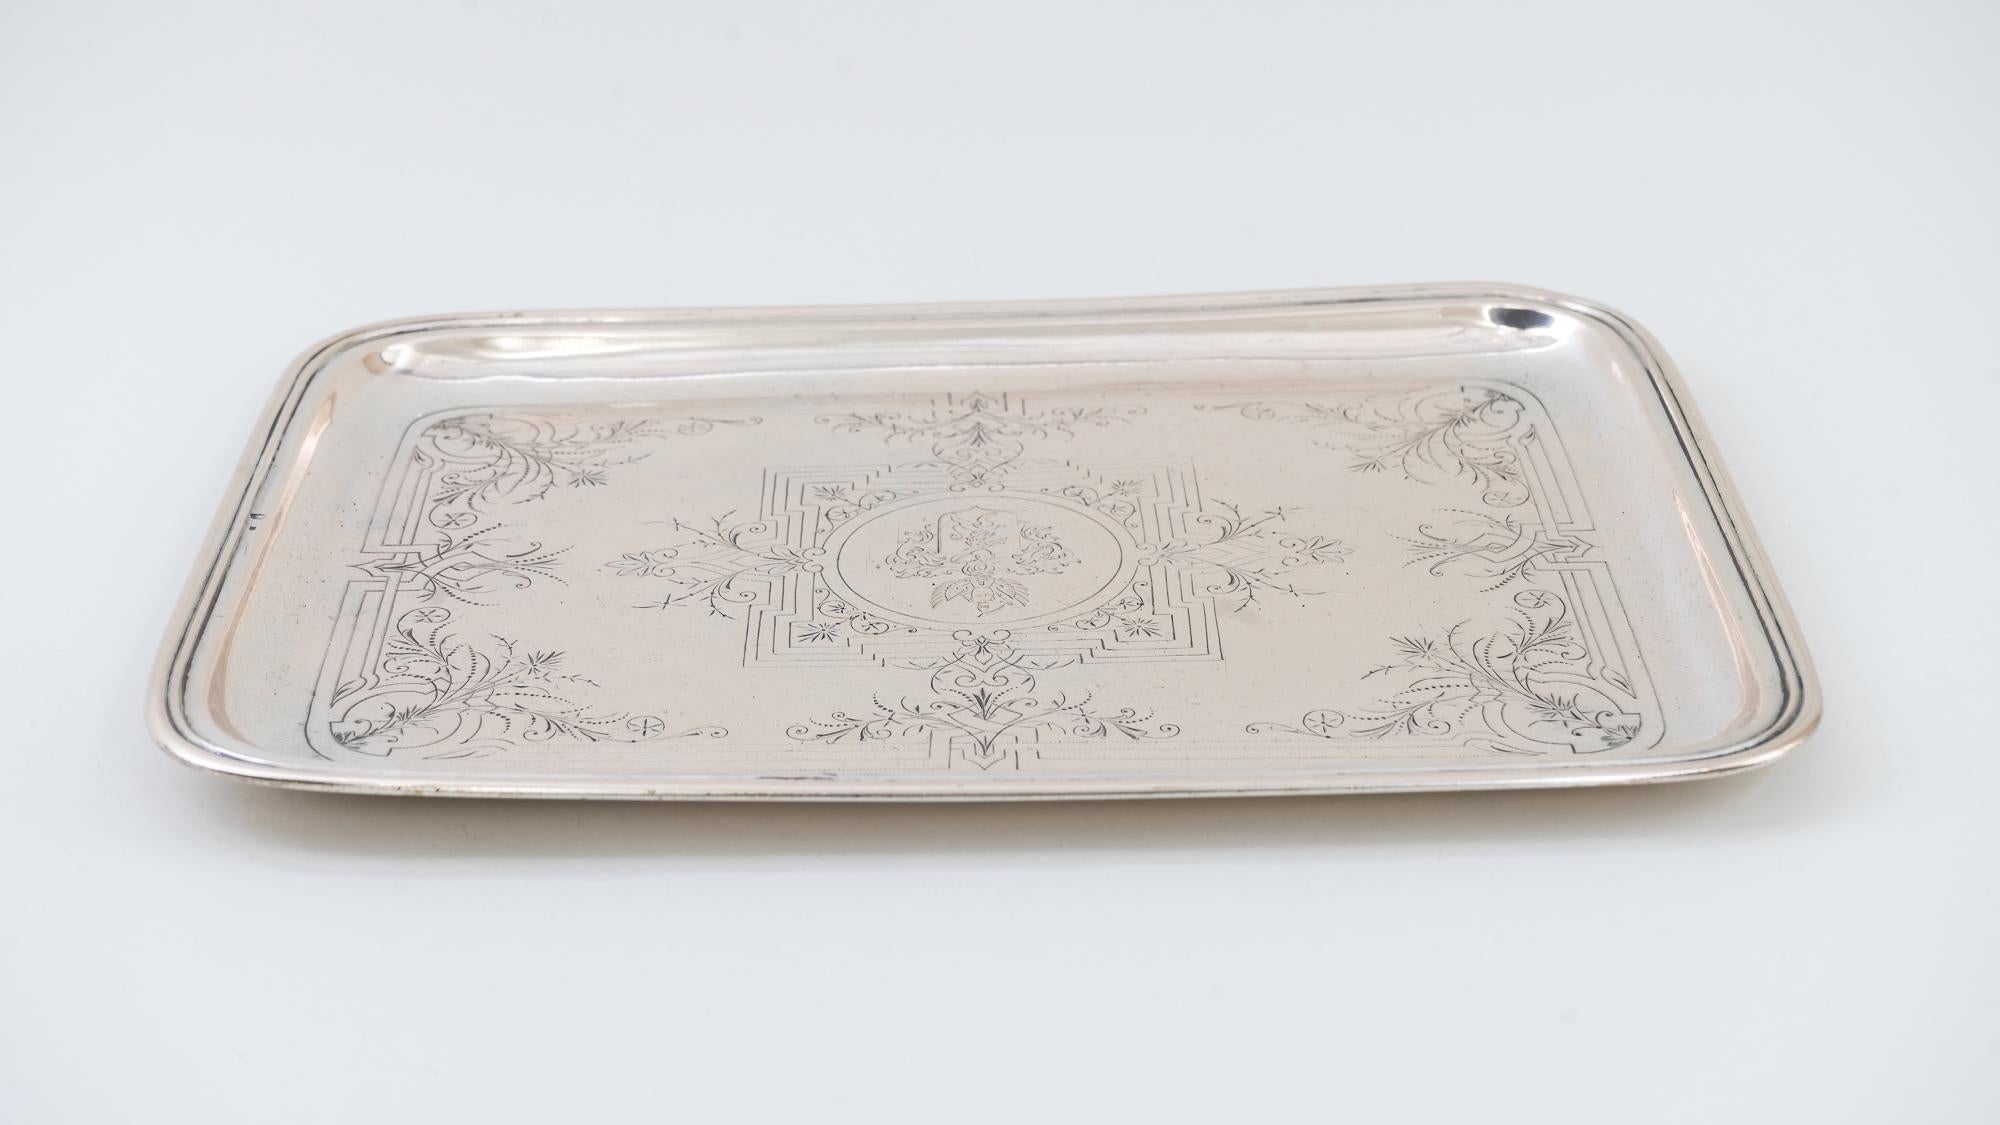 Silver serving plate, Vienna, circa 1920s
Polished and stove enameled
Silver hallmarking (last 2 photos).
     